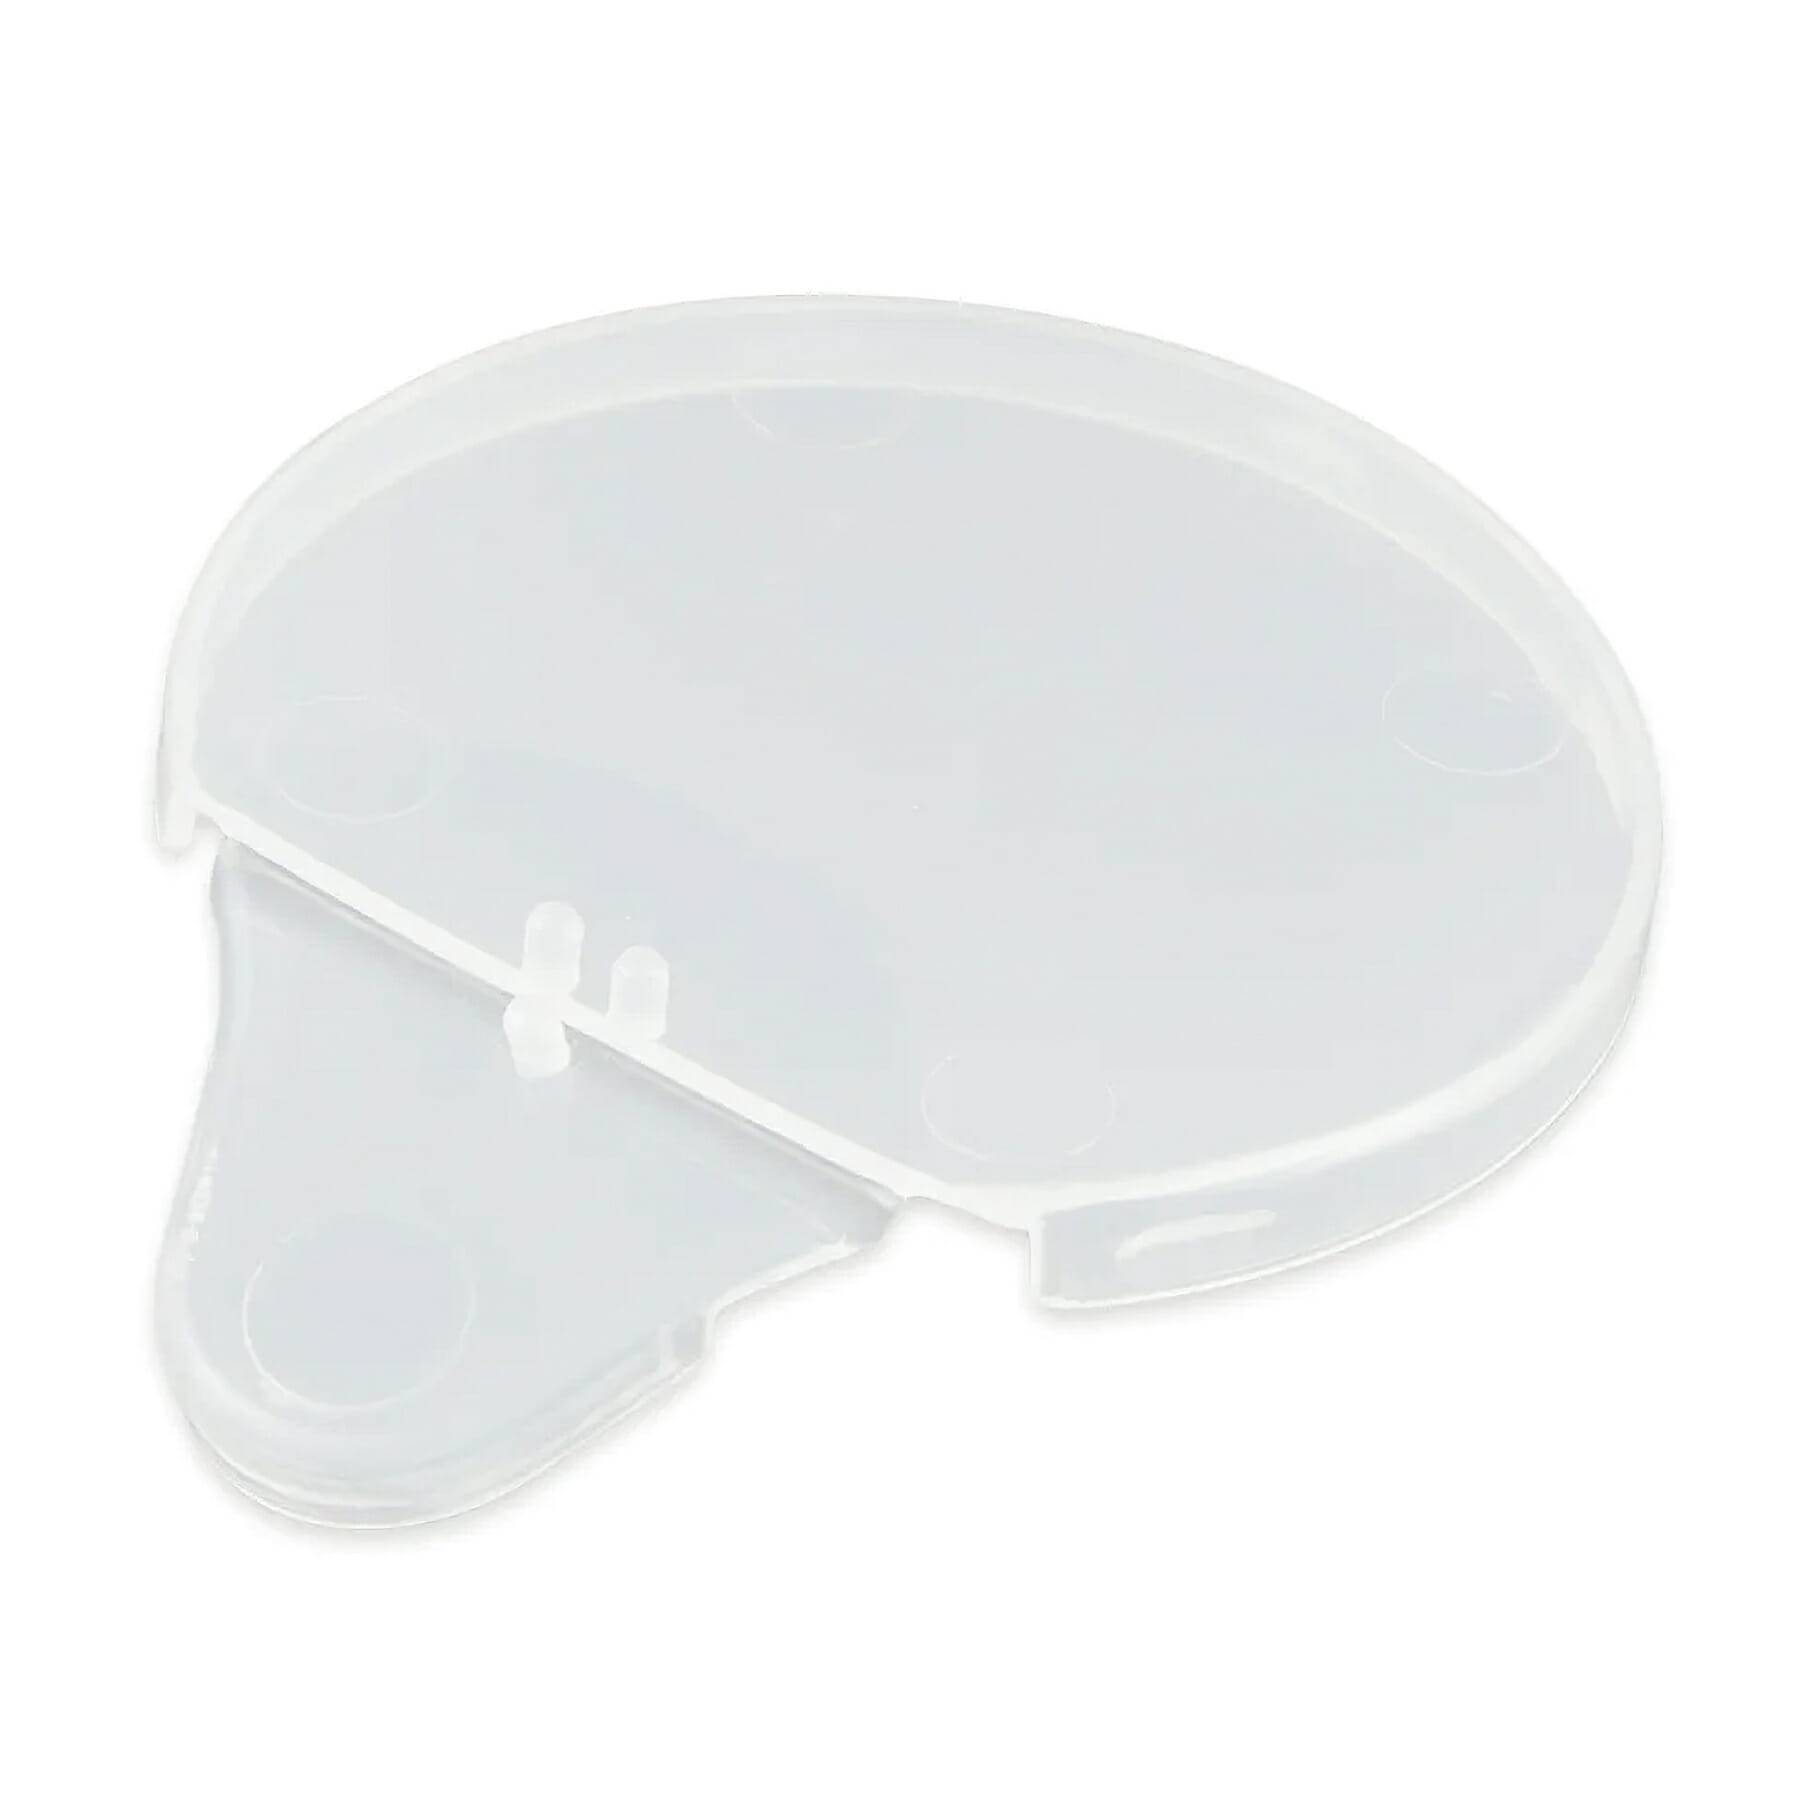 Replacement Lid for BW-1100